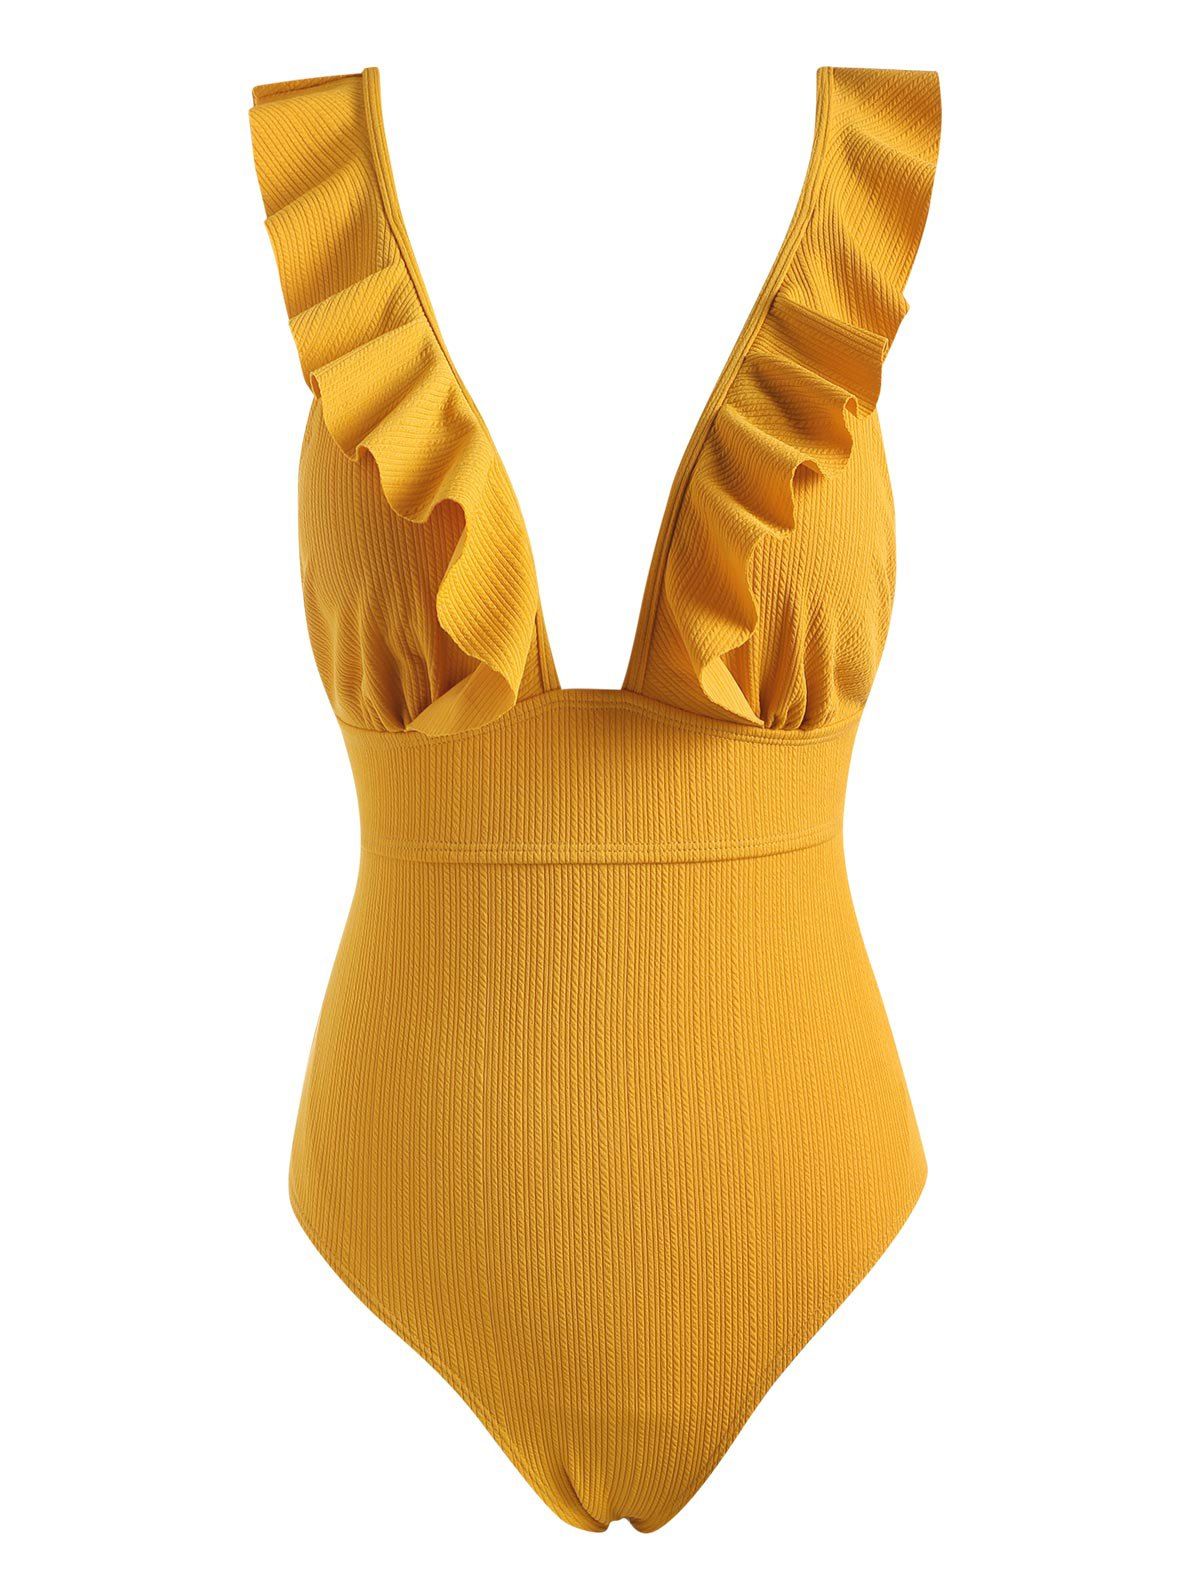 Textured Ribbed Ruffle Lace-up One-piece Swimsuit - DEEP YELLOW S